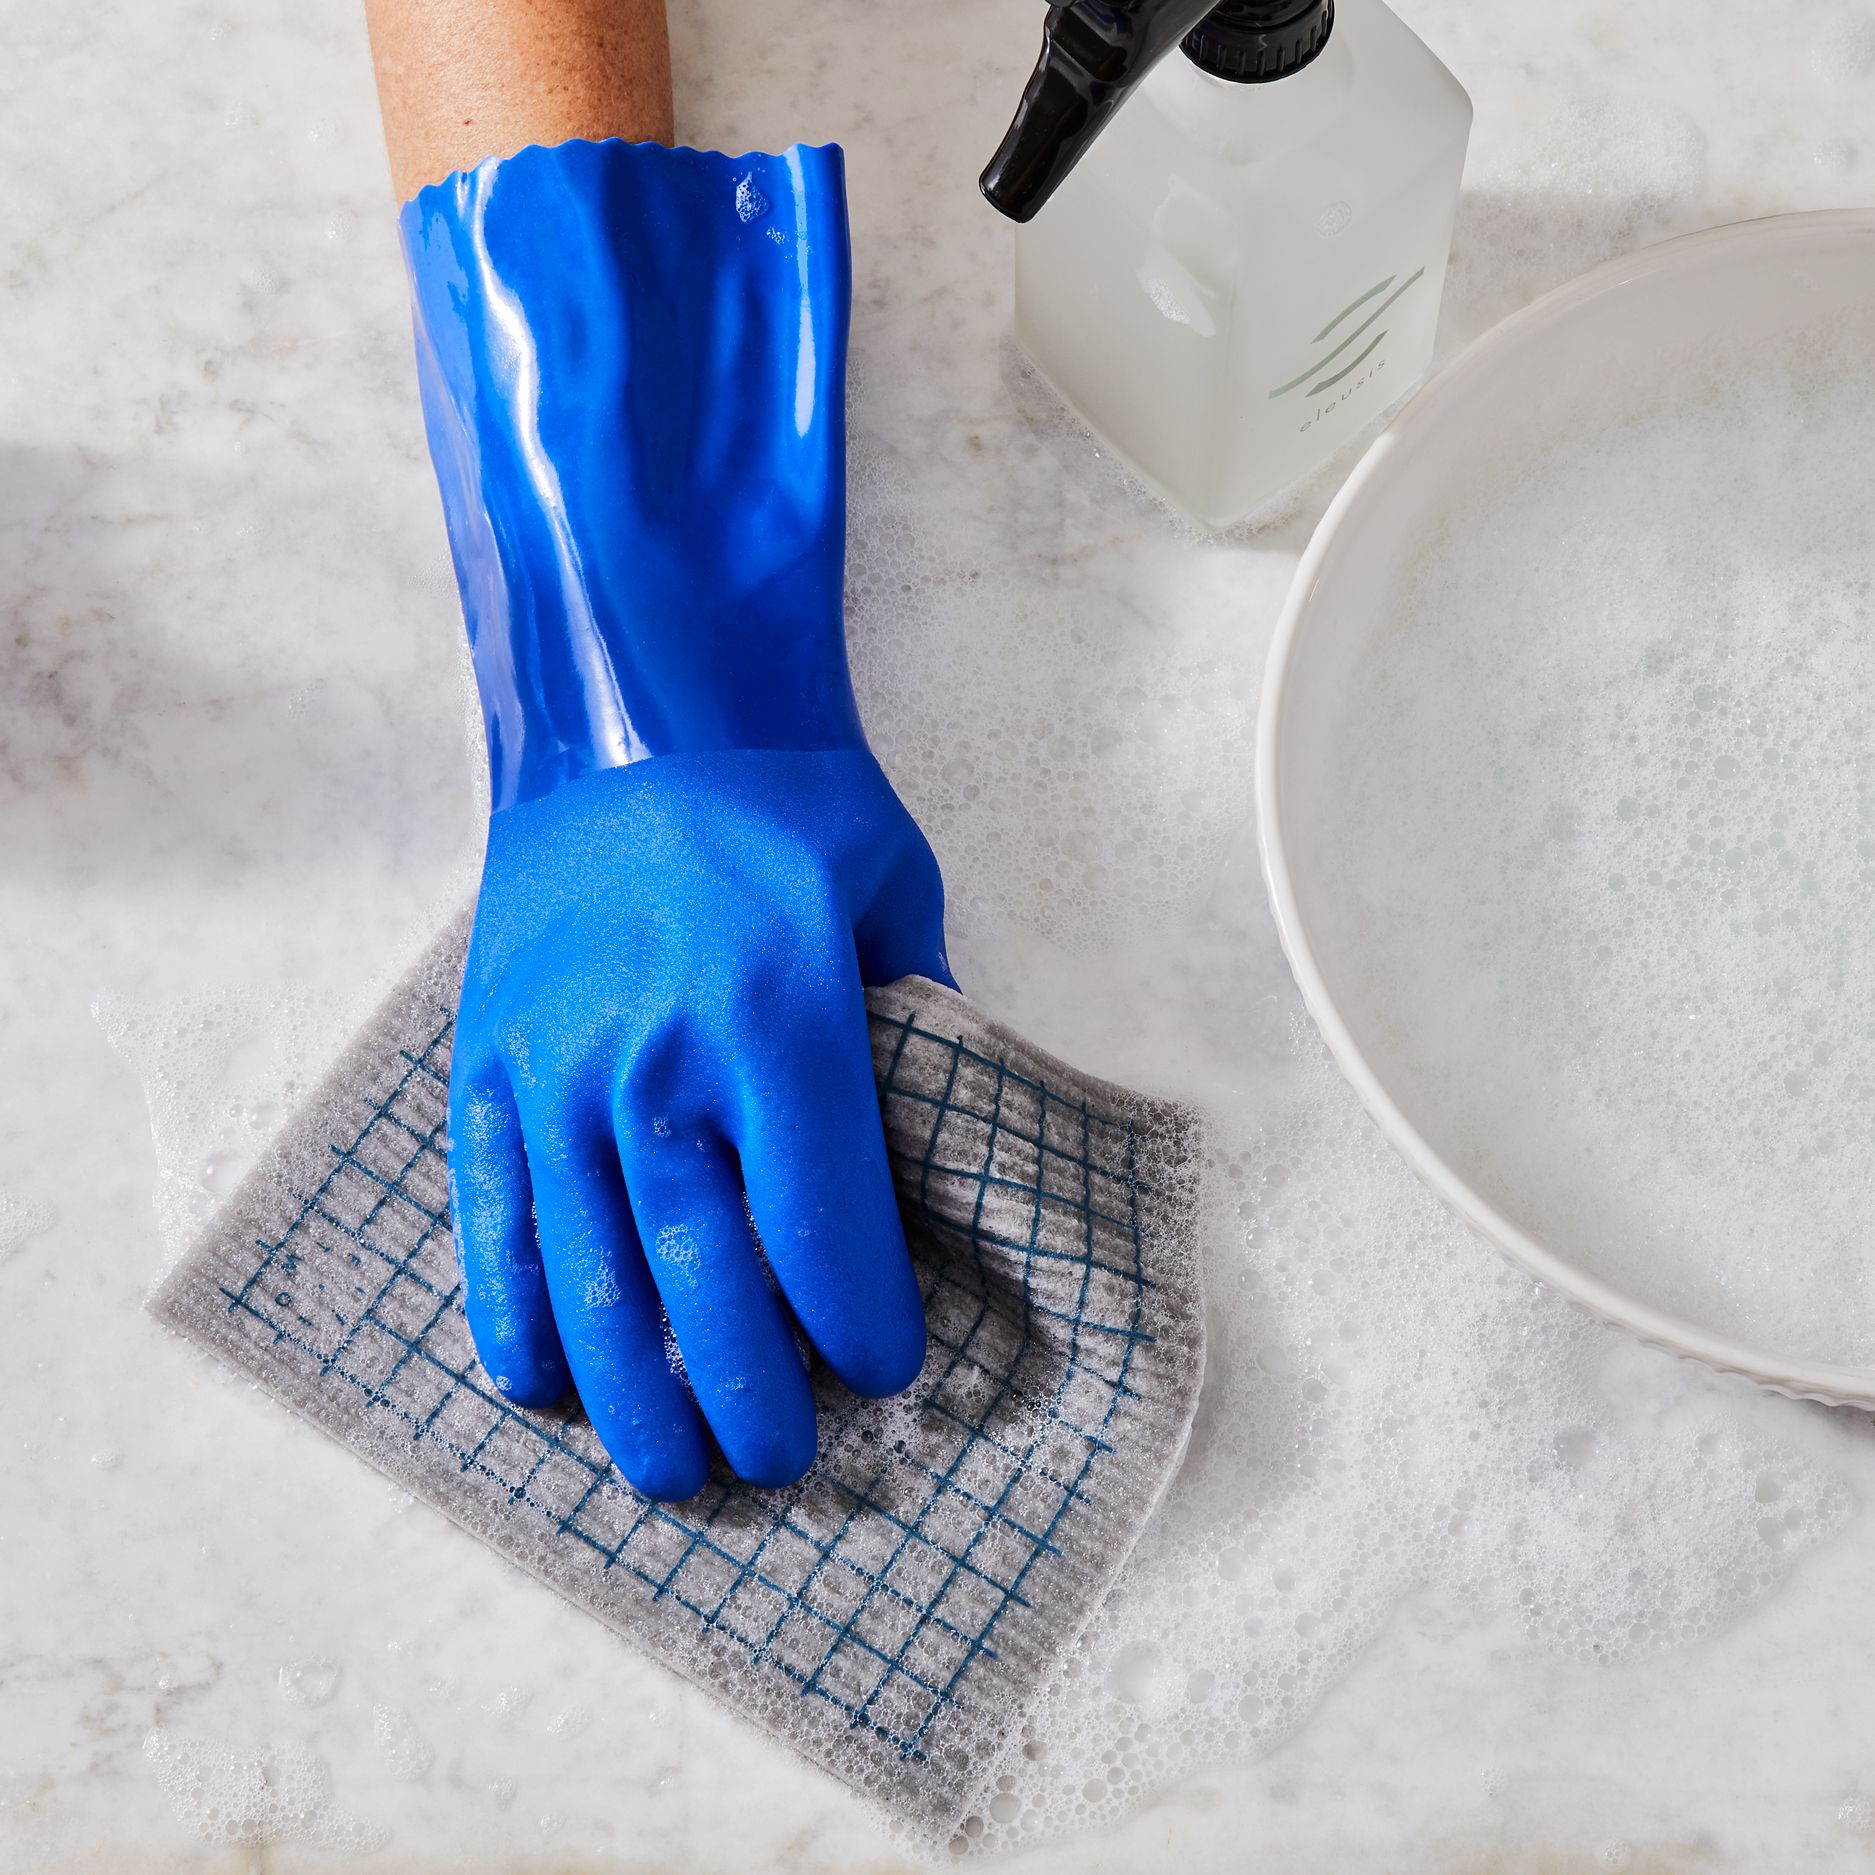 13 Essential Cleaning Tools Ready to Tackle Every Mess